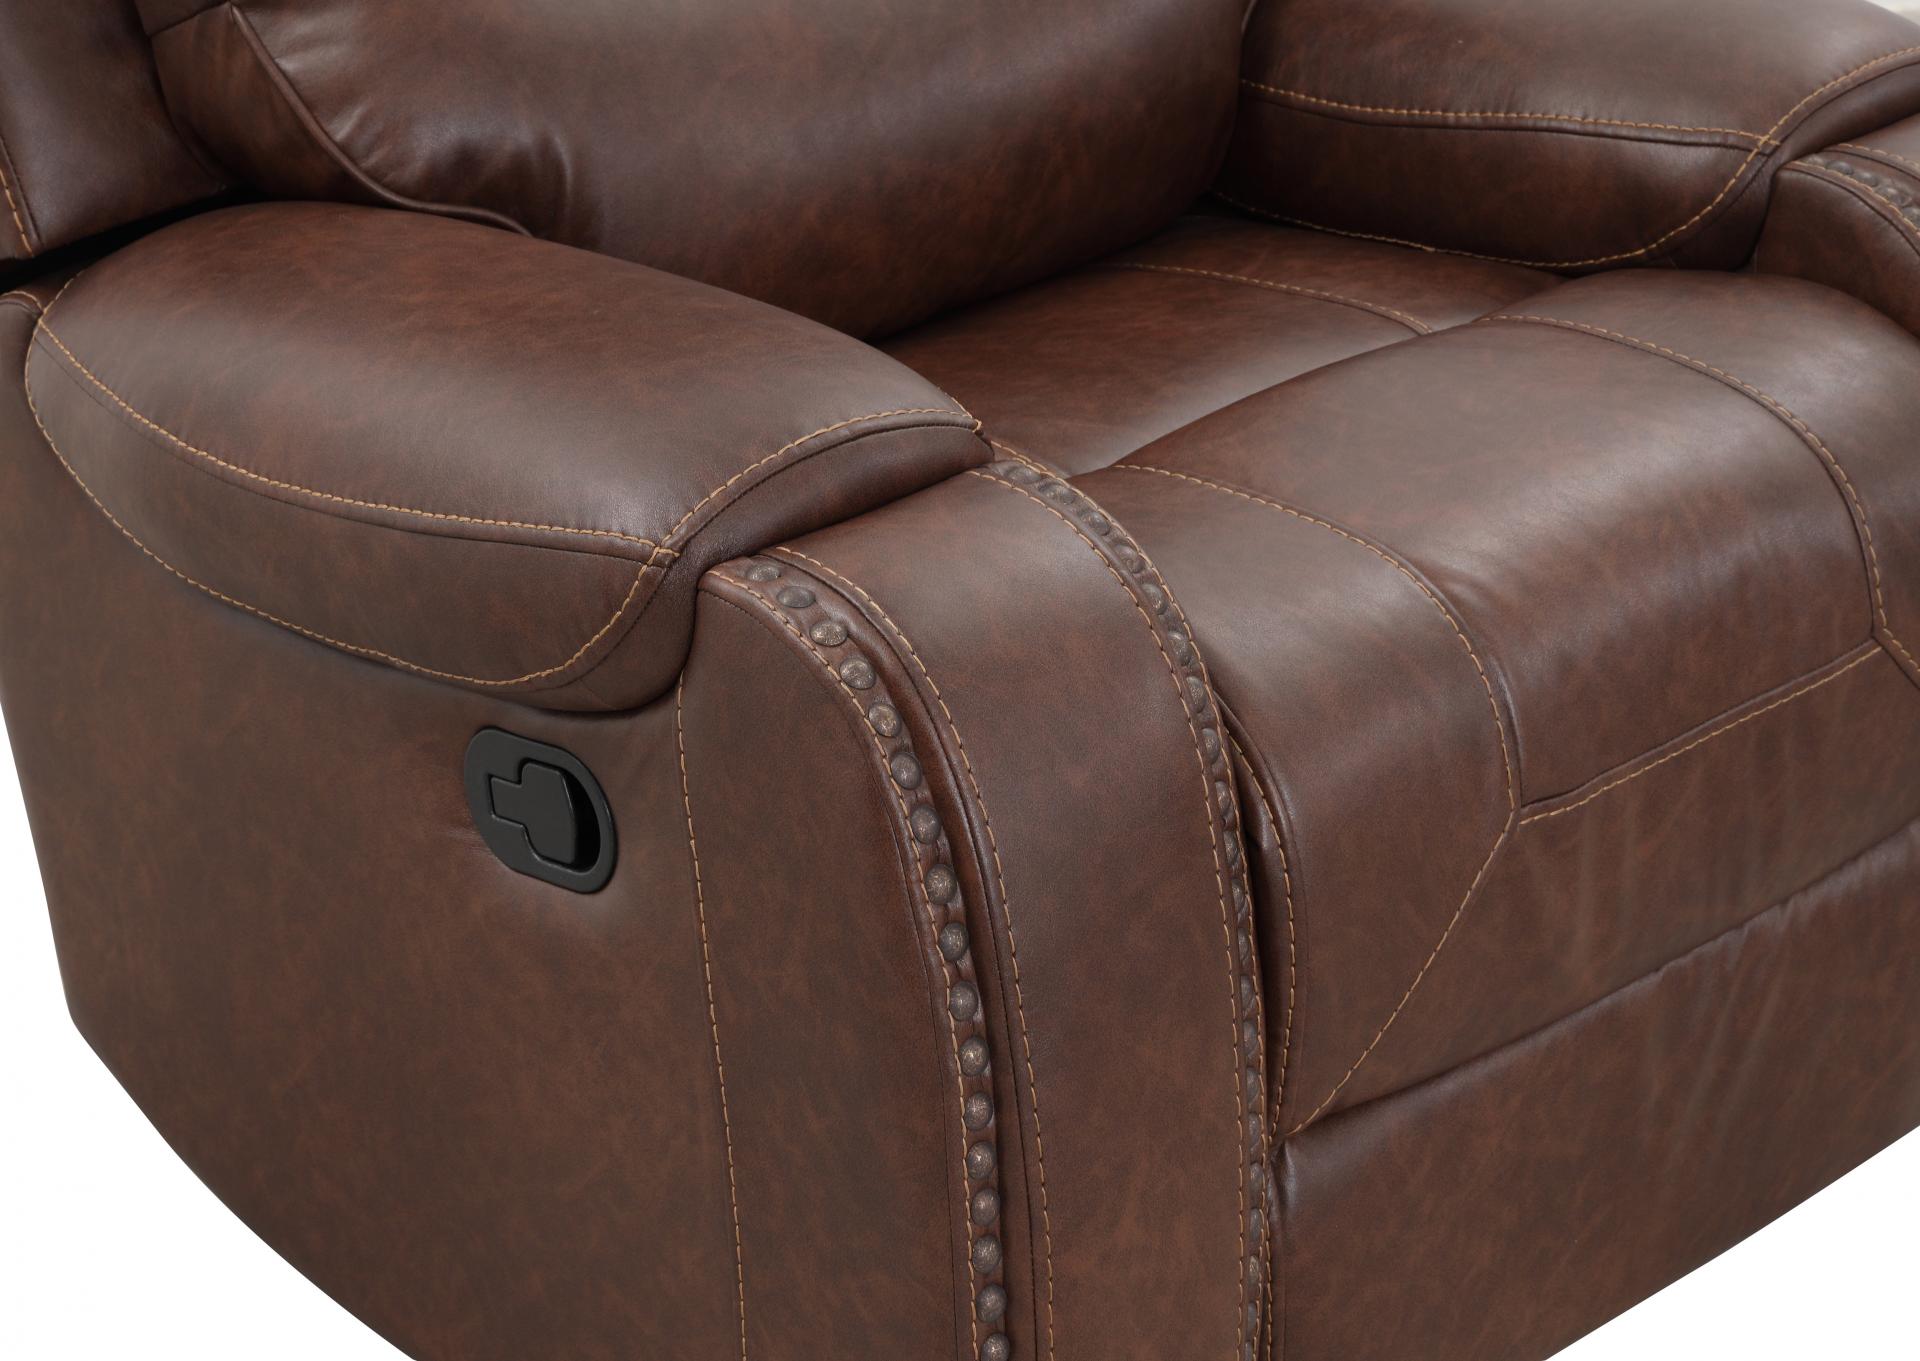 Dual reclining Glider Love Seat with console